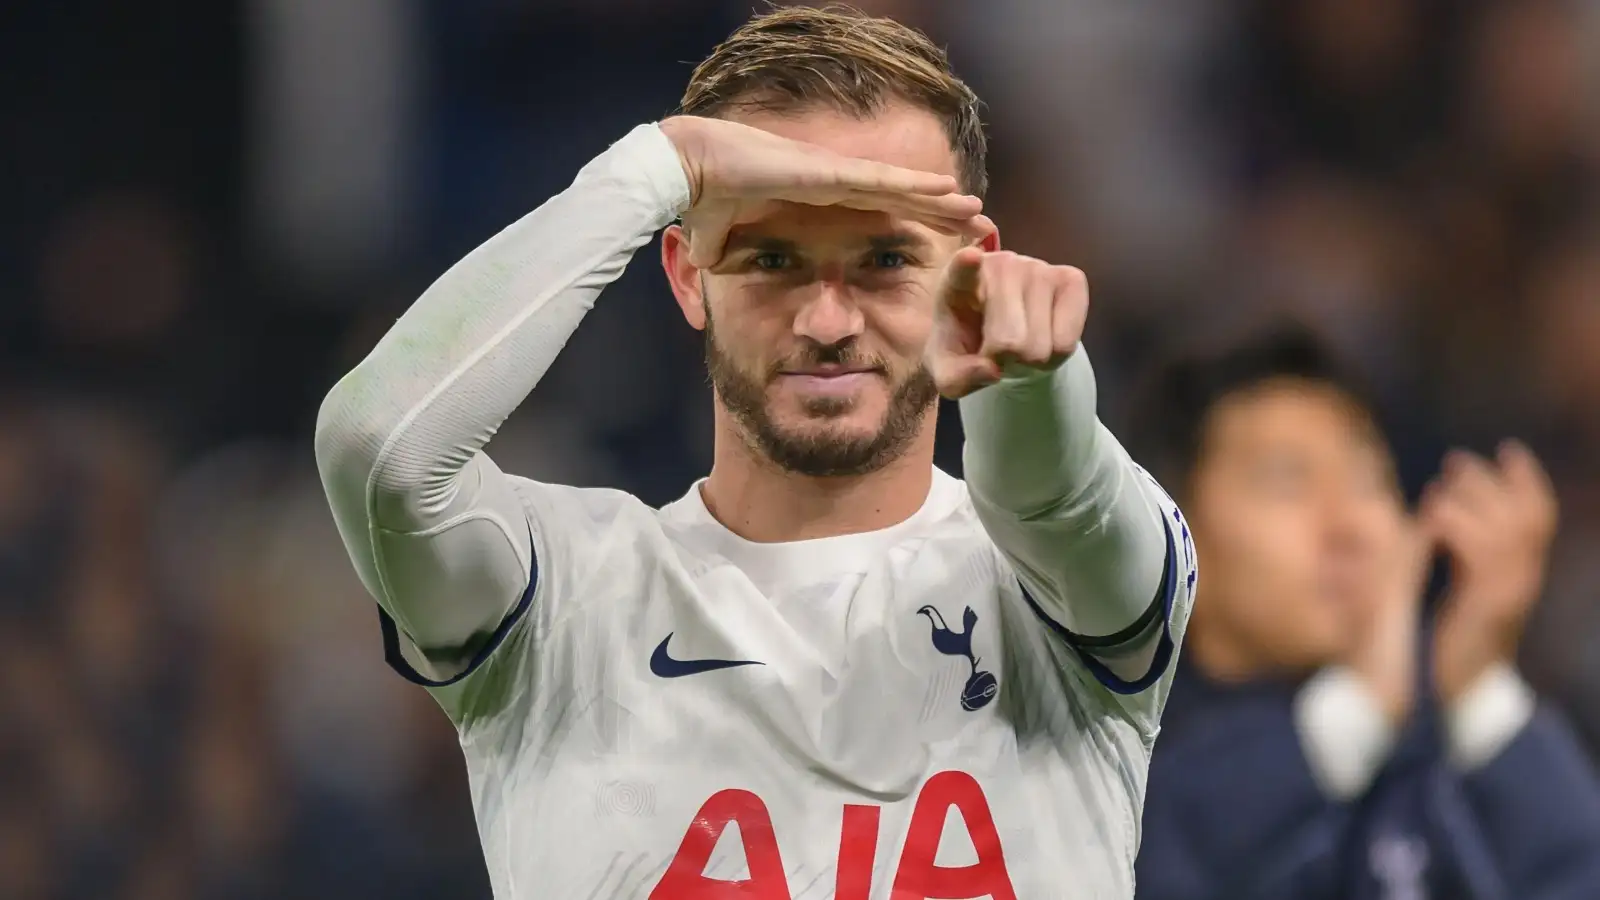 Maddison is the closest thing to Gazza and one of the reasons Spurs can  become Invincibles...